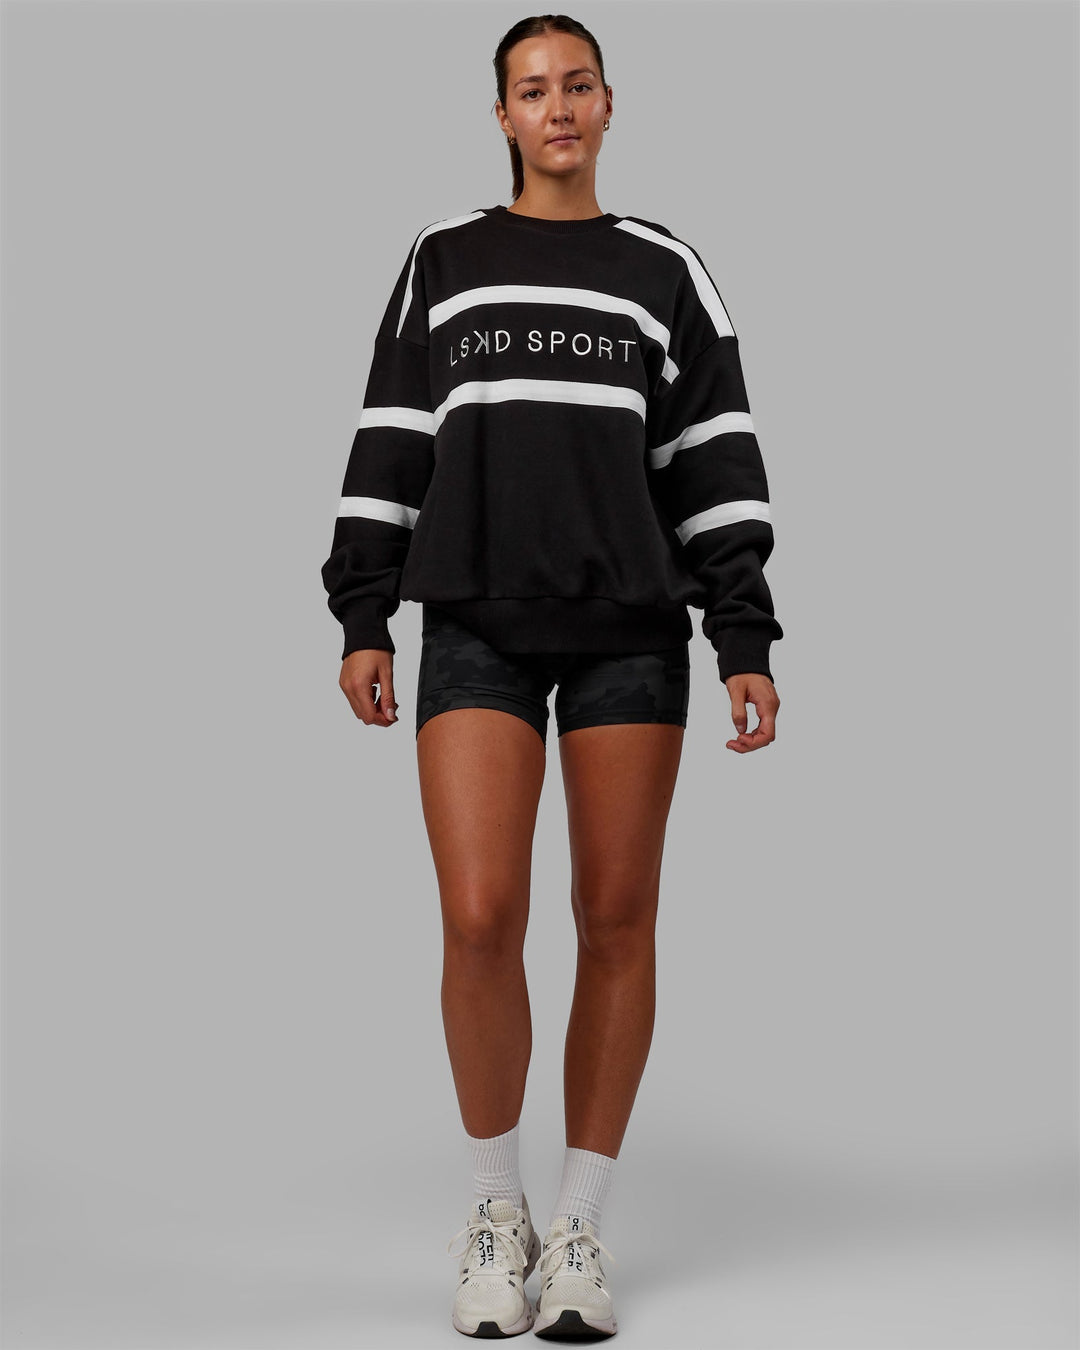 Woman wearing Unisex Collateral Sweater Oversize - Black-White